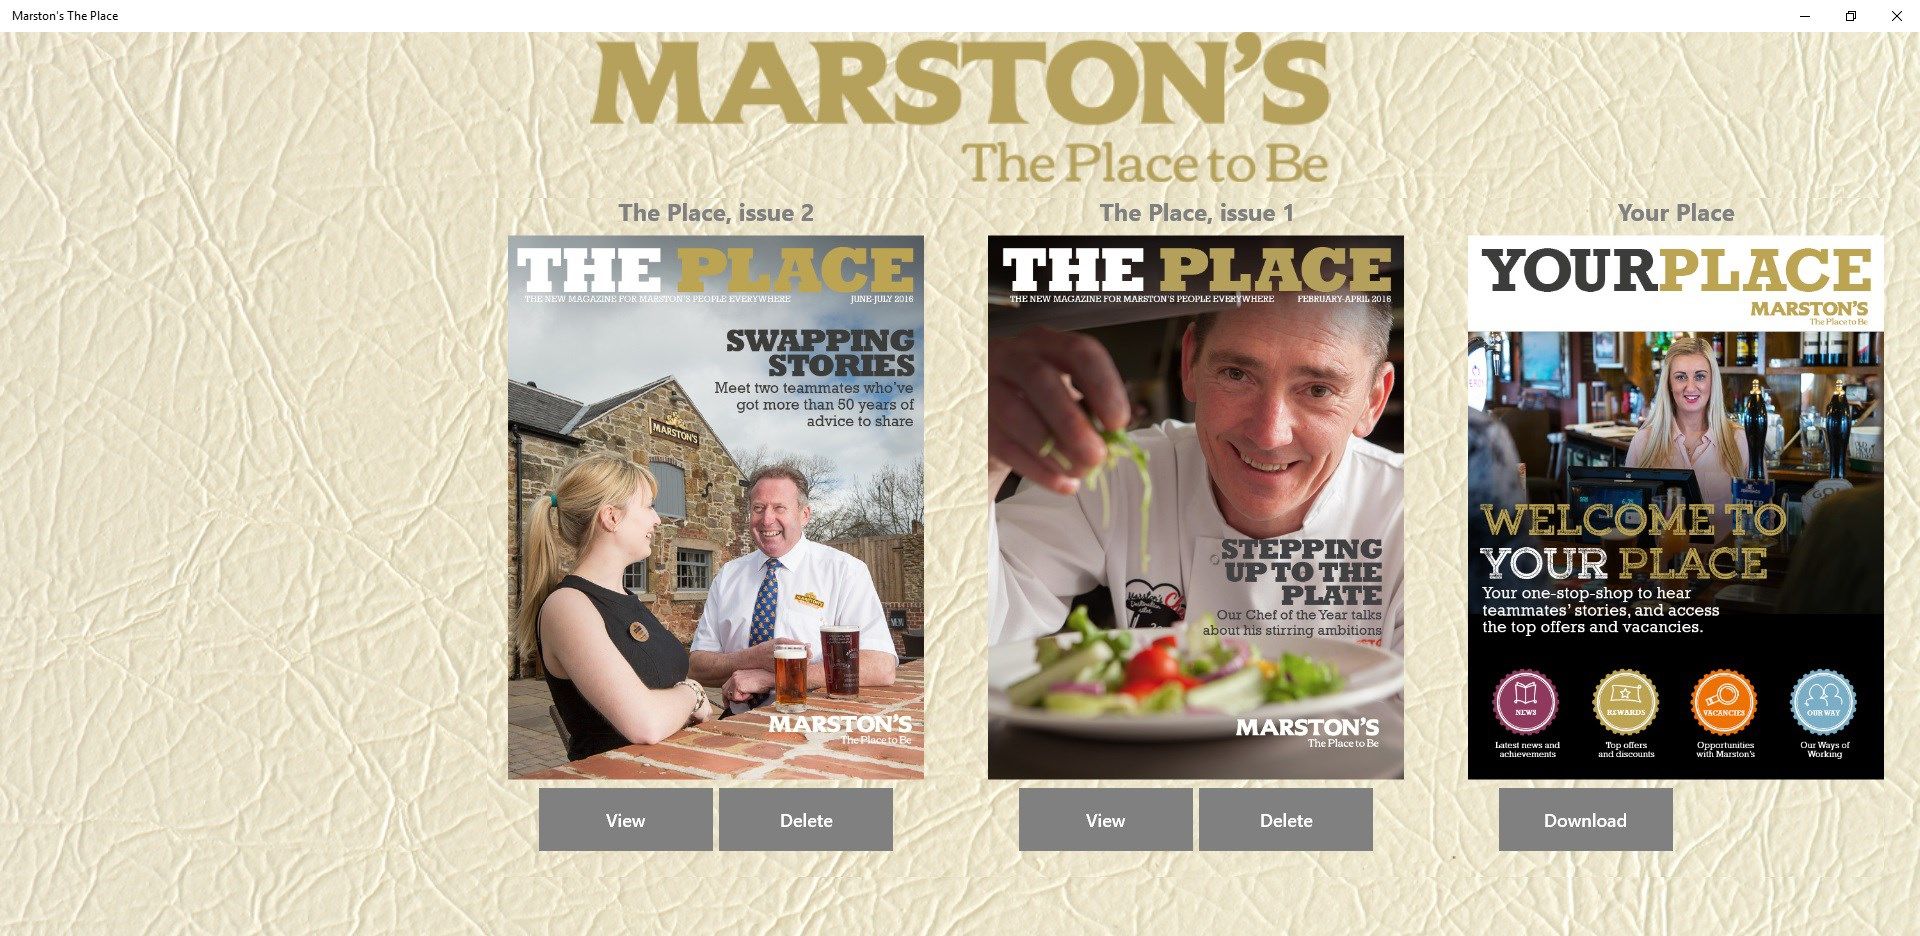 Marston’s The Place – desktop and tablet